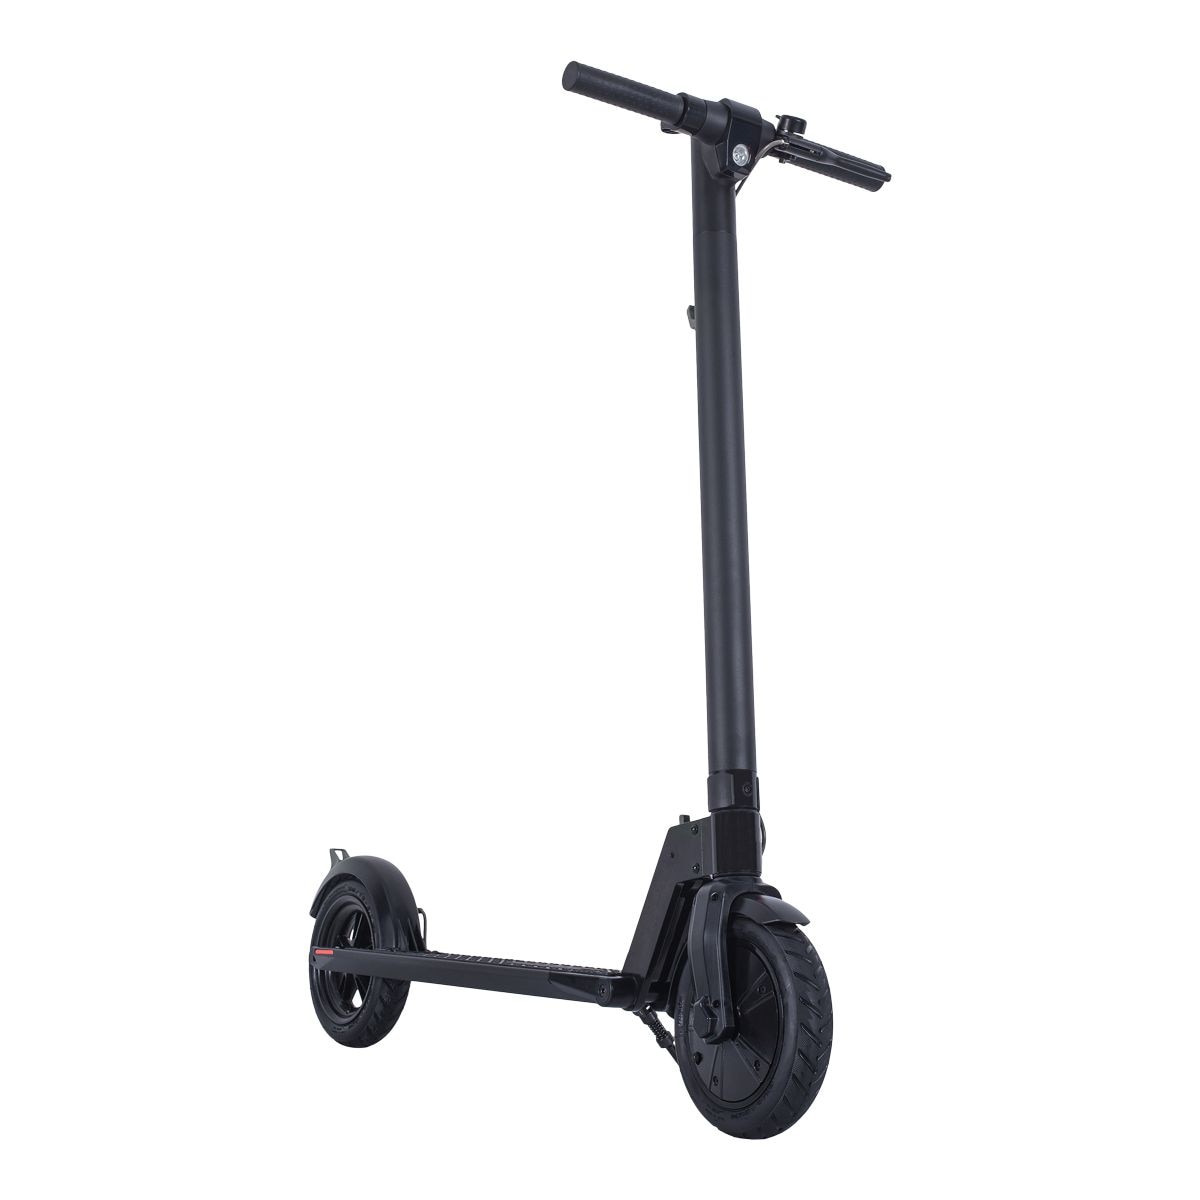 $50/mo - Finance CUNFON Electric Scooter, 350W Motor Electric